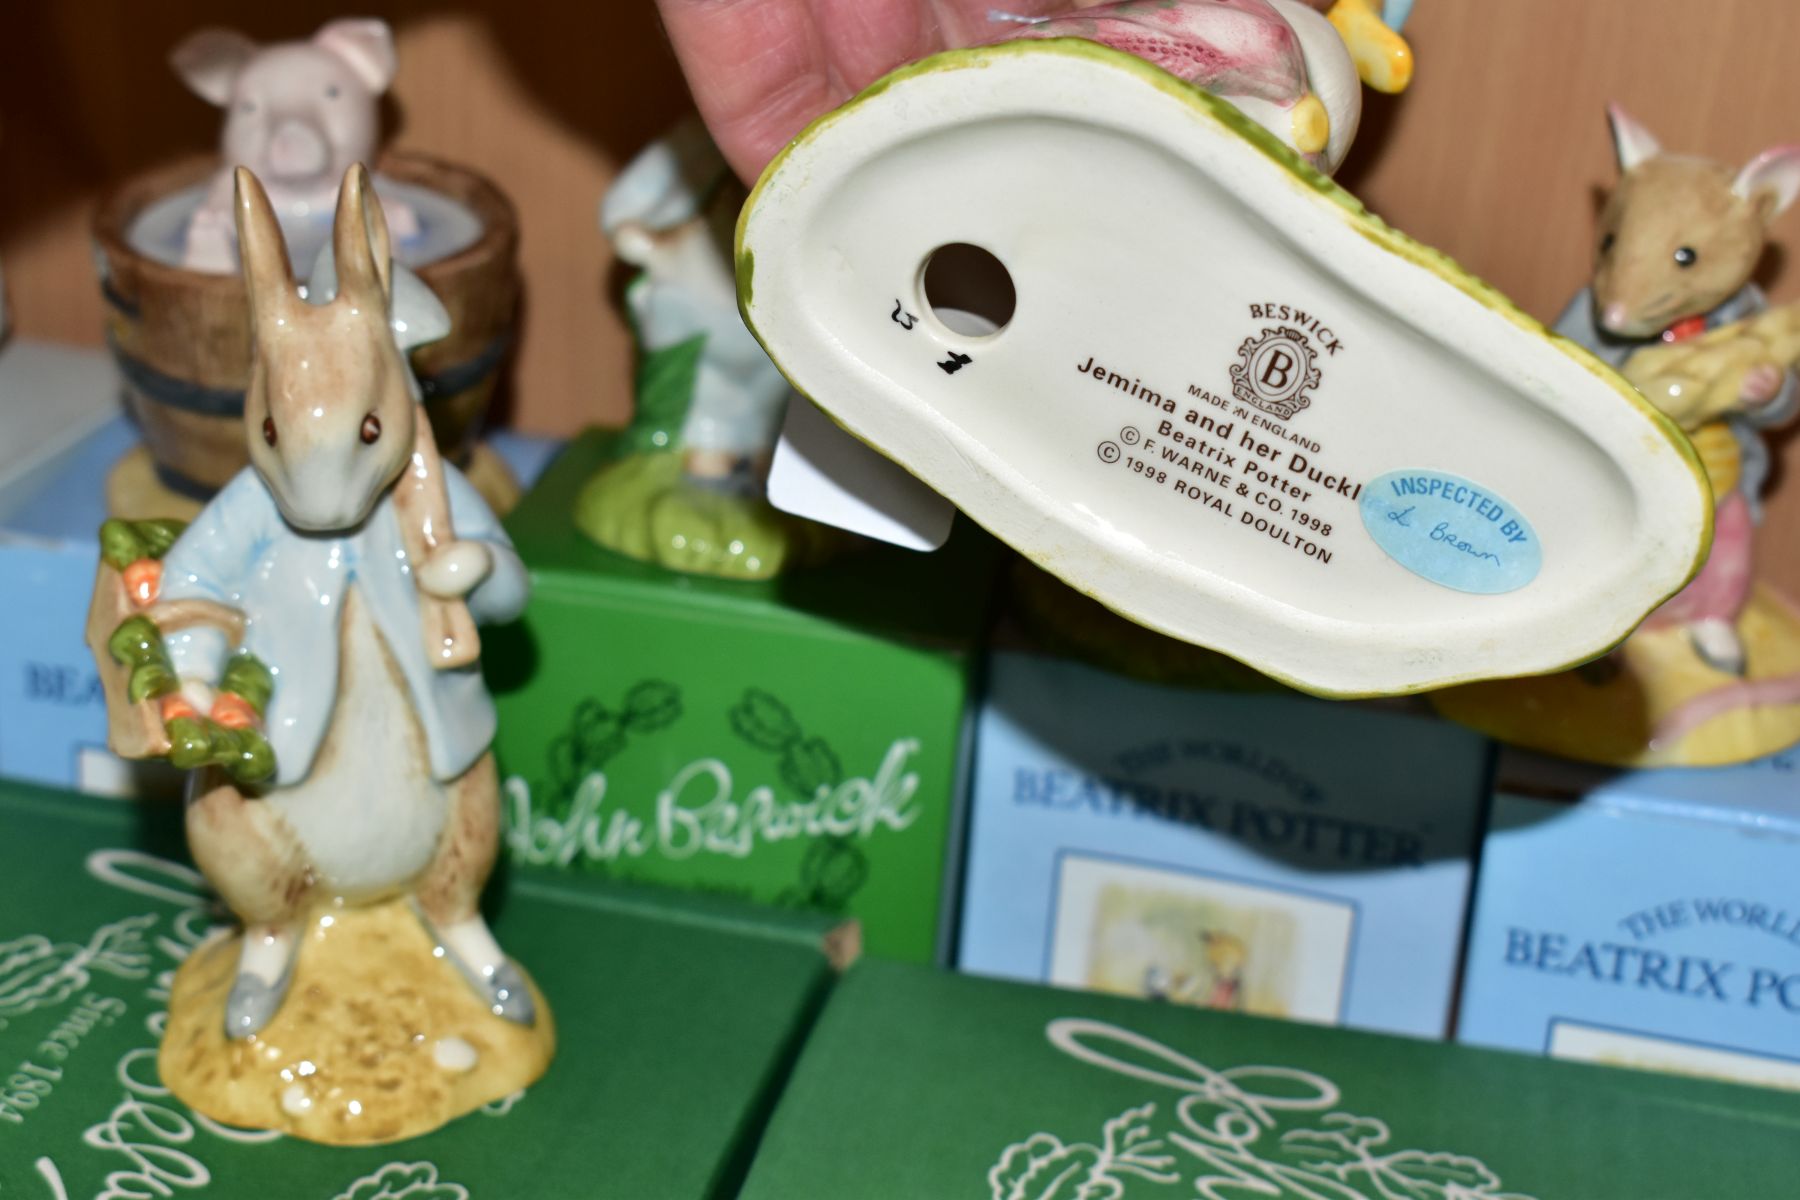 SIX BOXED BESWICK BEATRIX POTTER FIGURES, BP10a, comprising Jemima and her Ducklings, Johnny Town- - Bild 4 aus 4